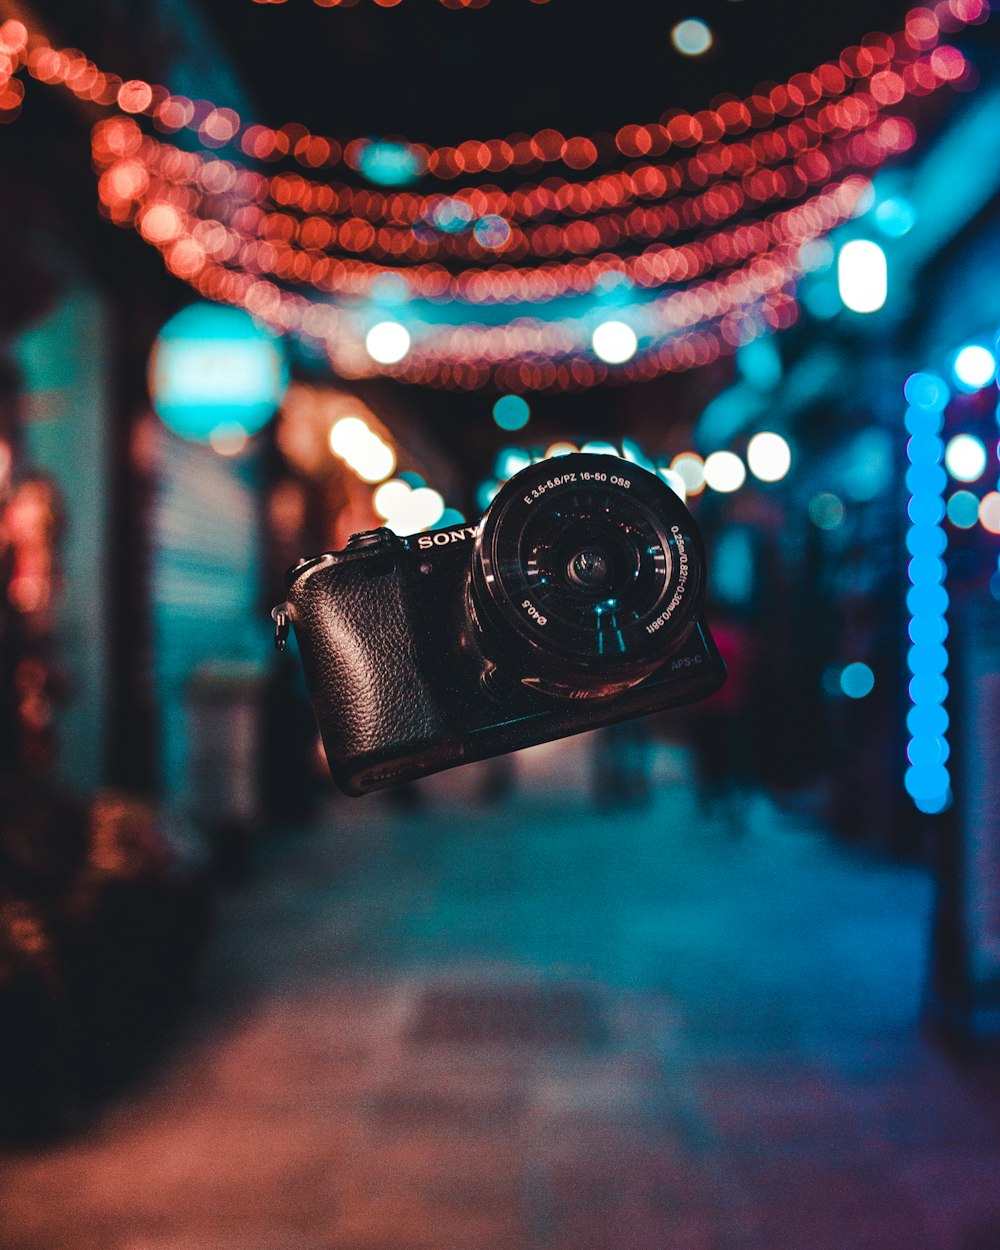 750+ Edit Pictures [HQ] | Download Free Images & Stock Photos on Unsplash